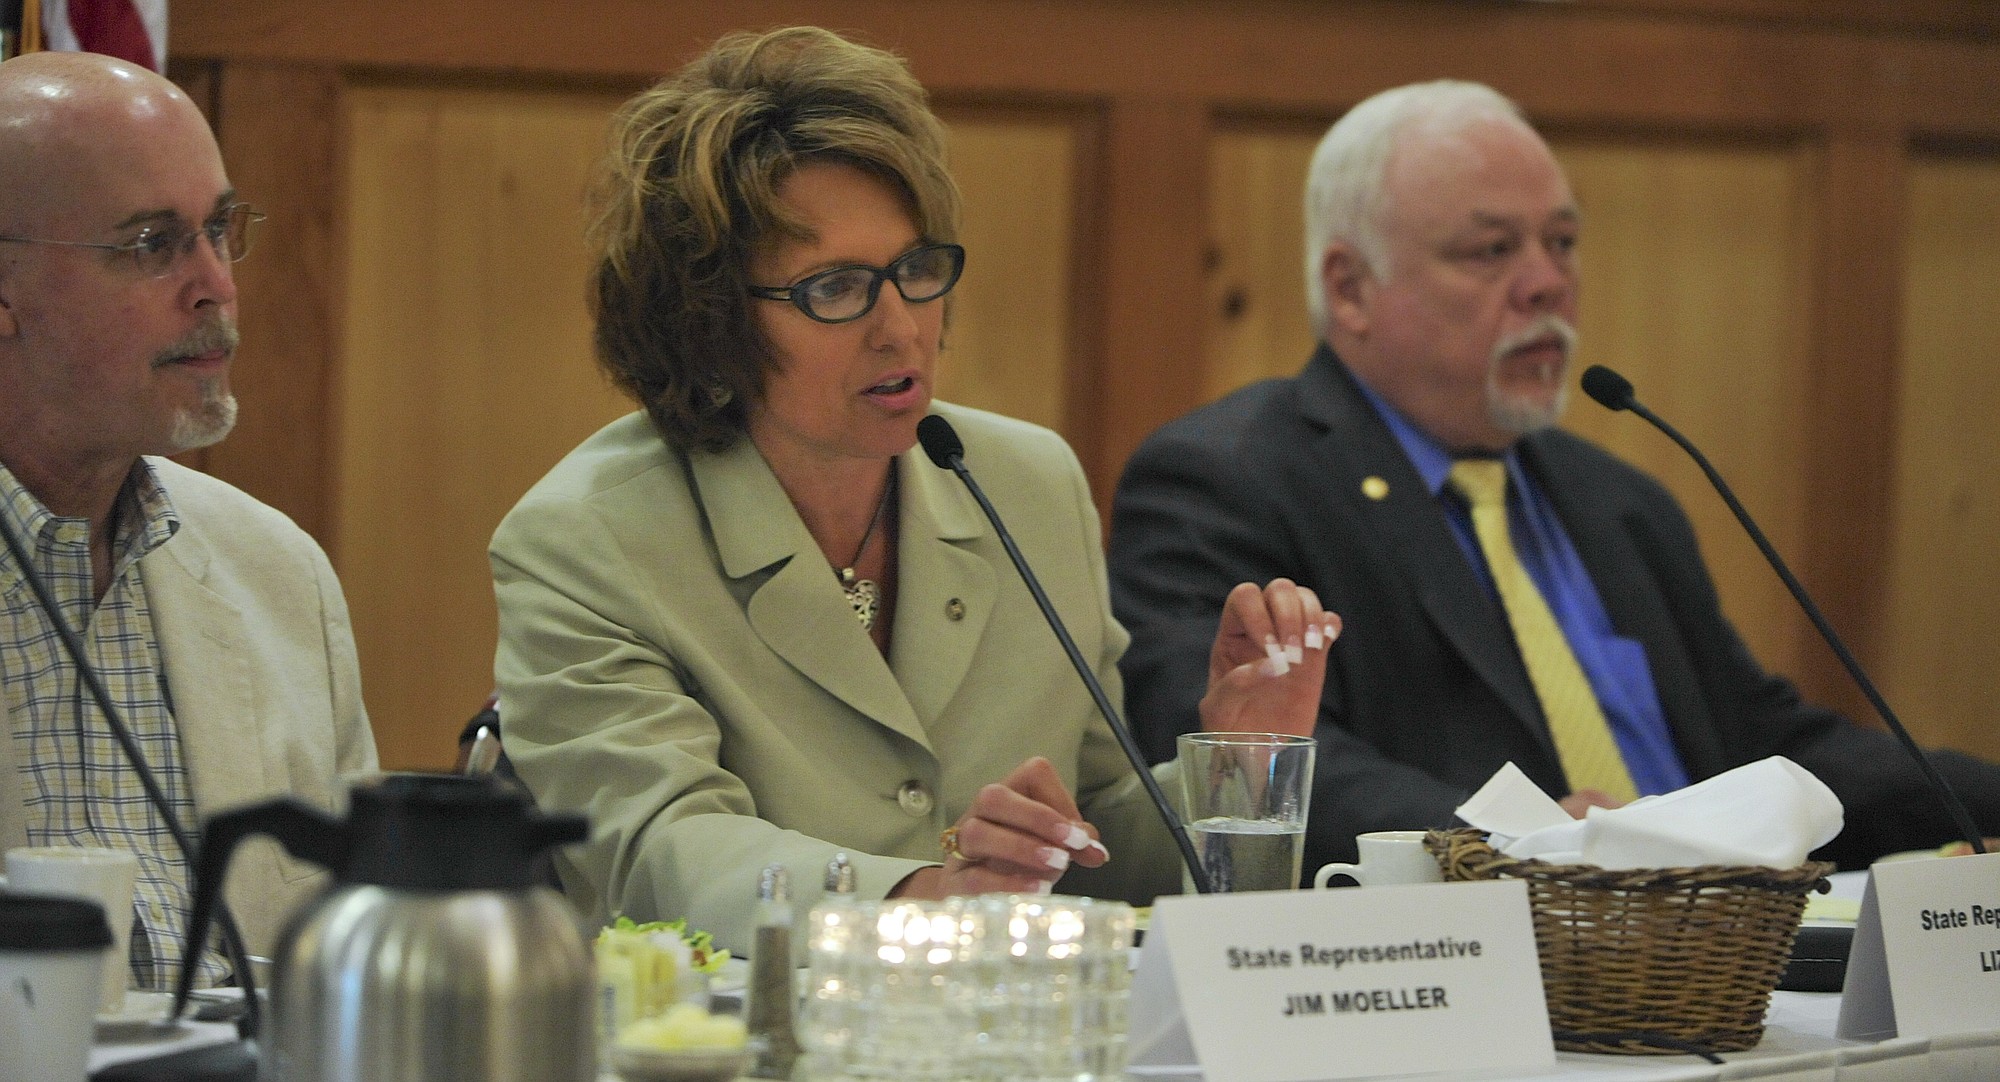 Rep. Liz Pike, R-Camas, center, speaks to lawmakers at a legislative review luncheon at the Heathman Lodge in Vancouver on Tuesday. Flanking Pike are Rep. Jim Moeller, D-Vancouver, left, and Sen.